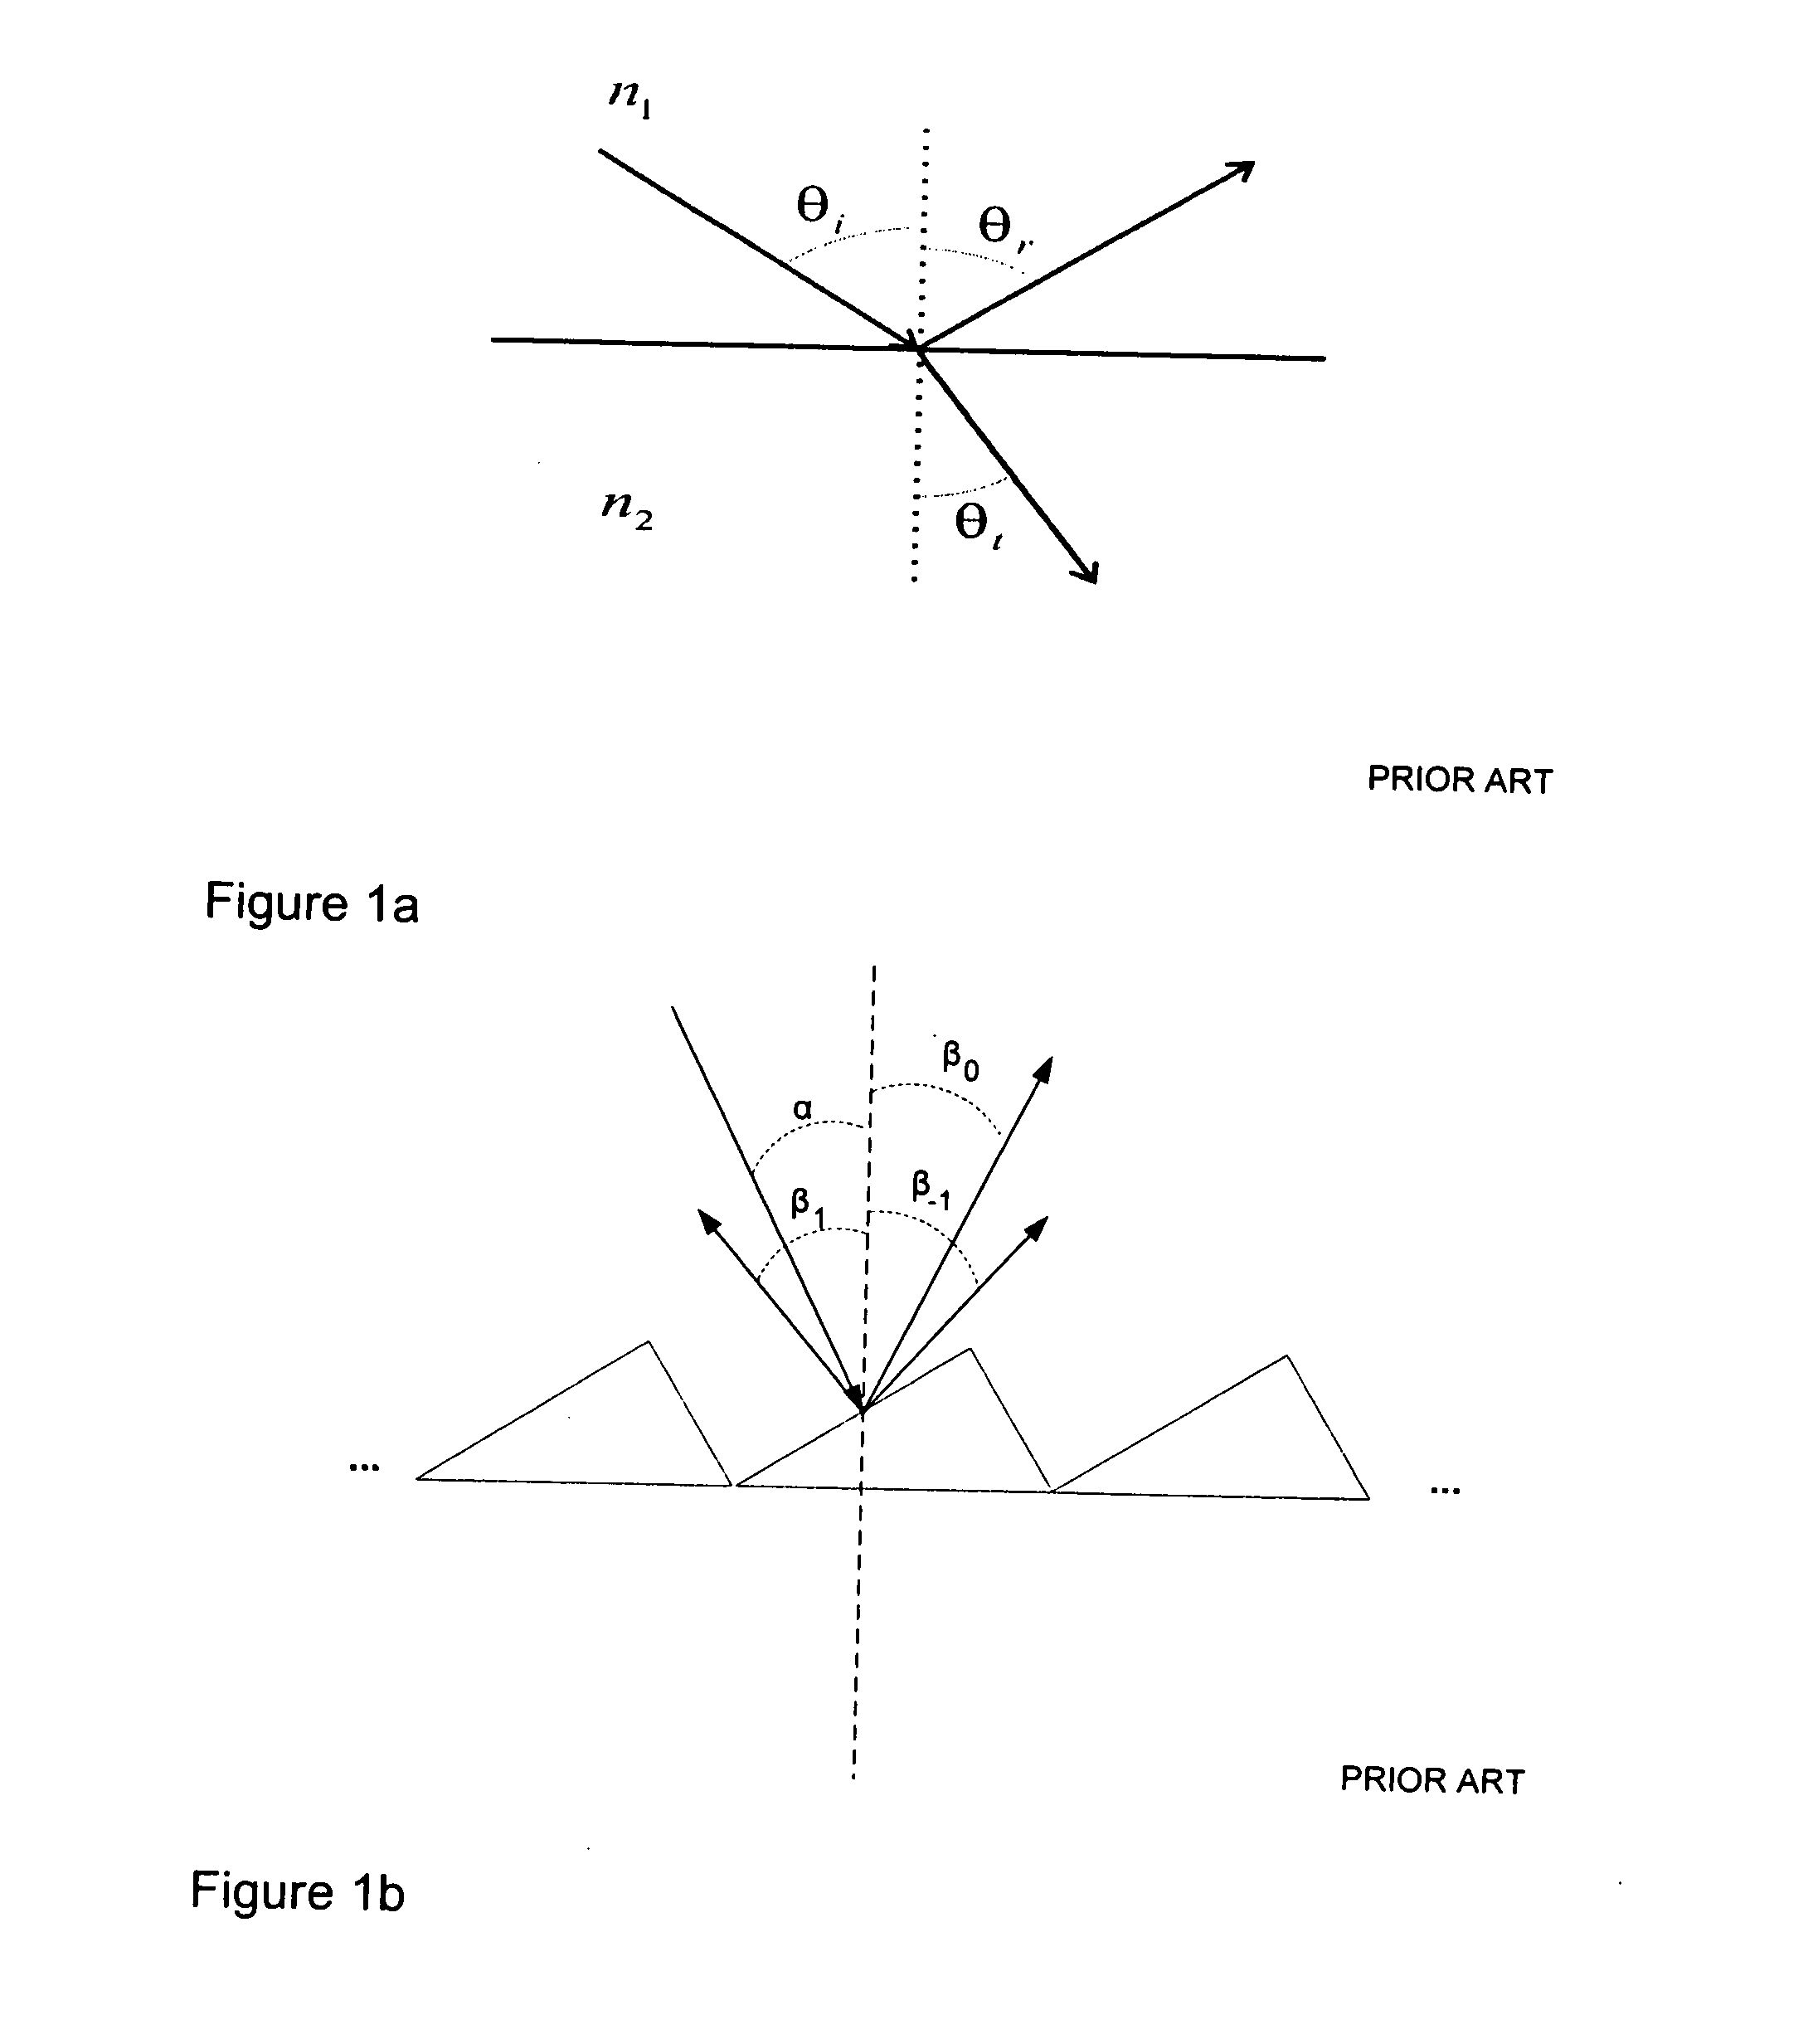 Light outcoupling structure for a lighting device